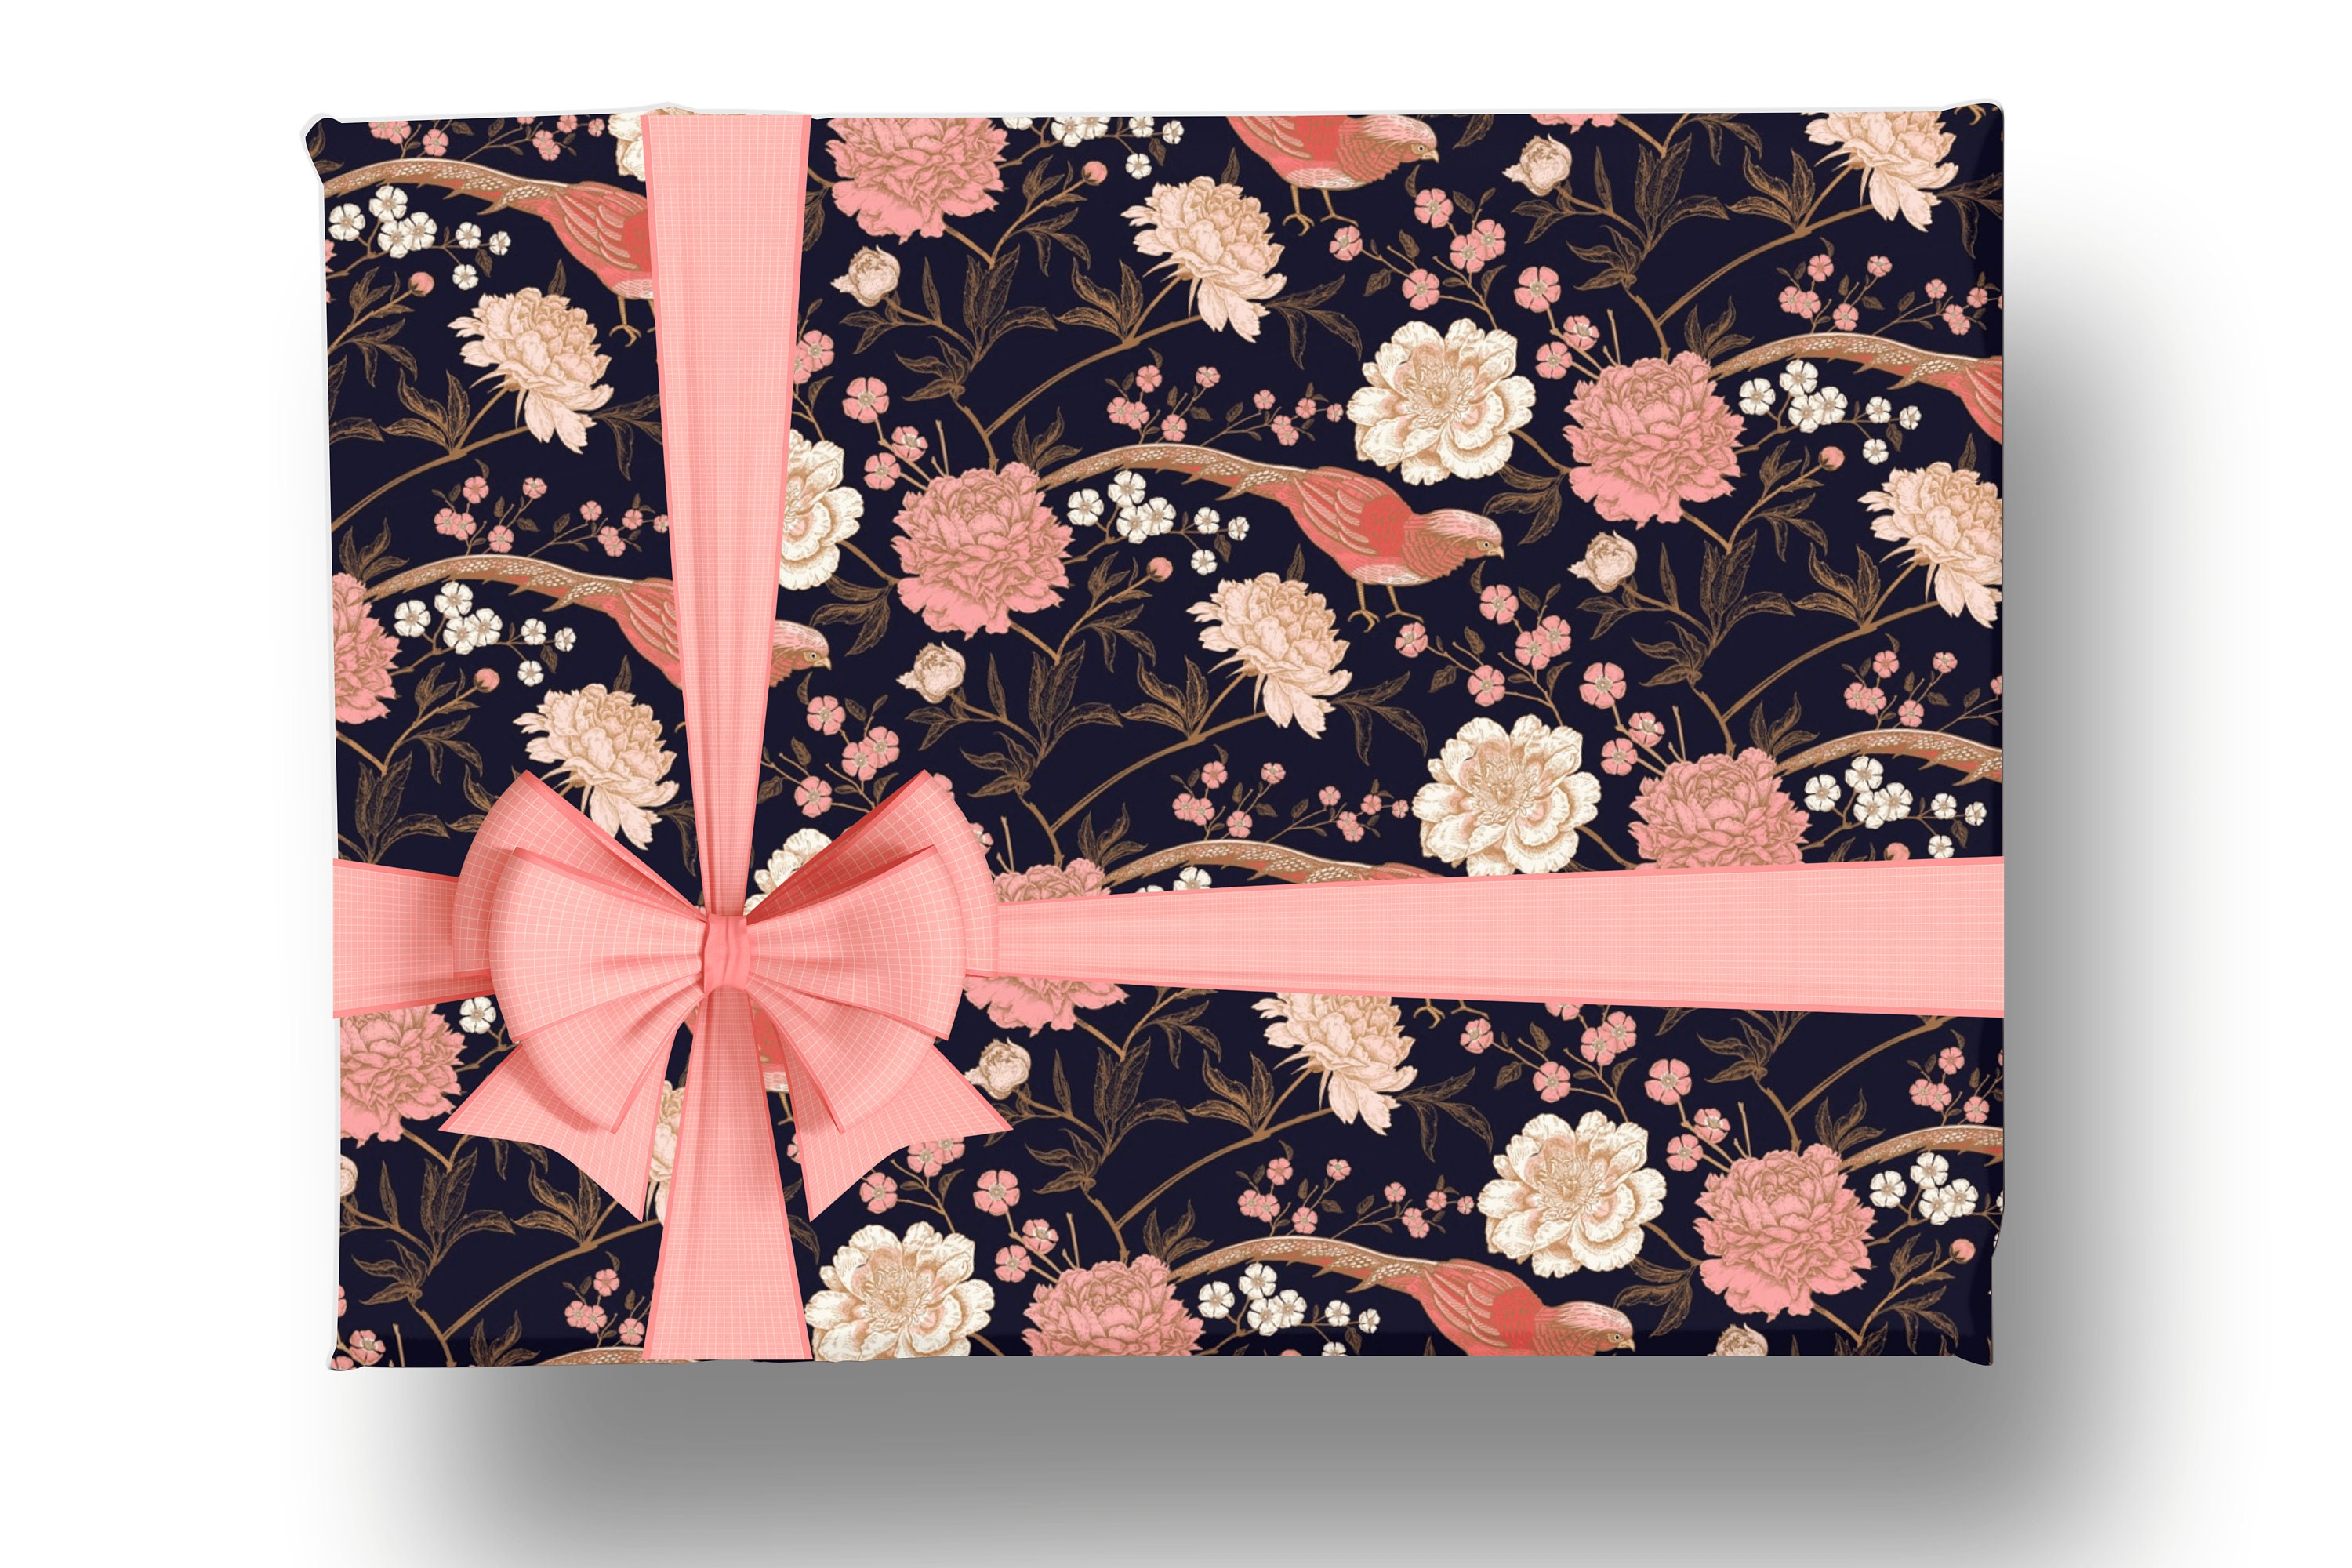  Current Birds on Black Christmas Rolled Wrapping Paper